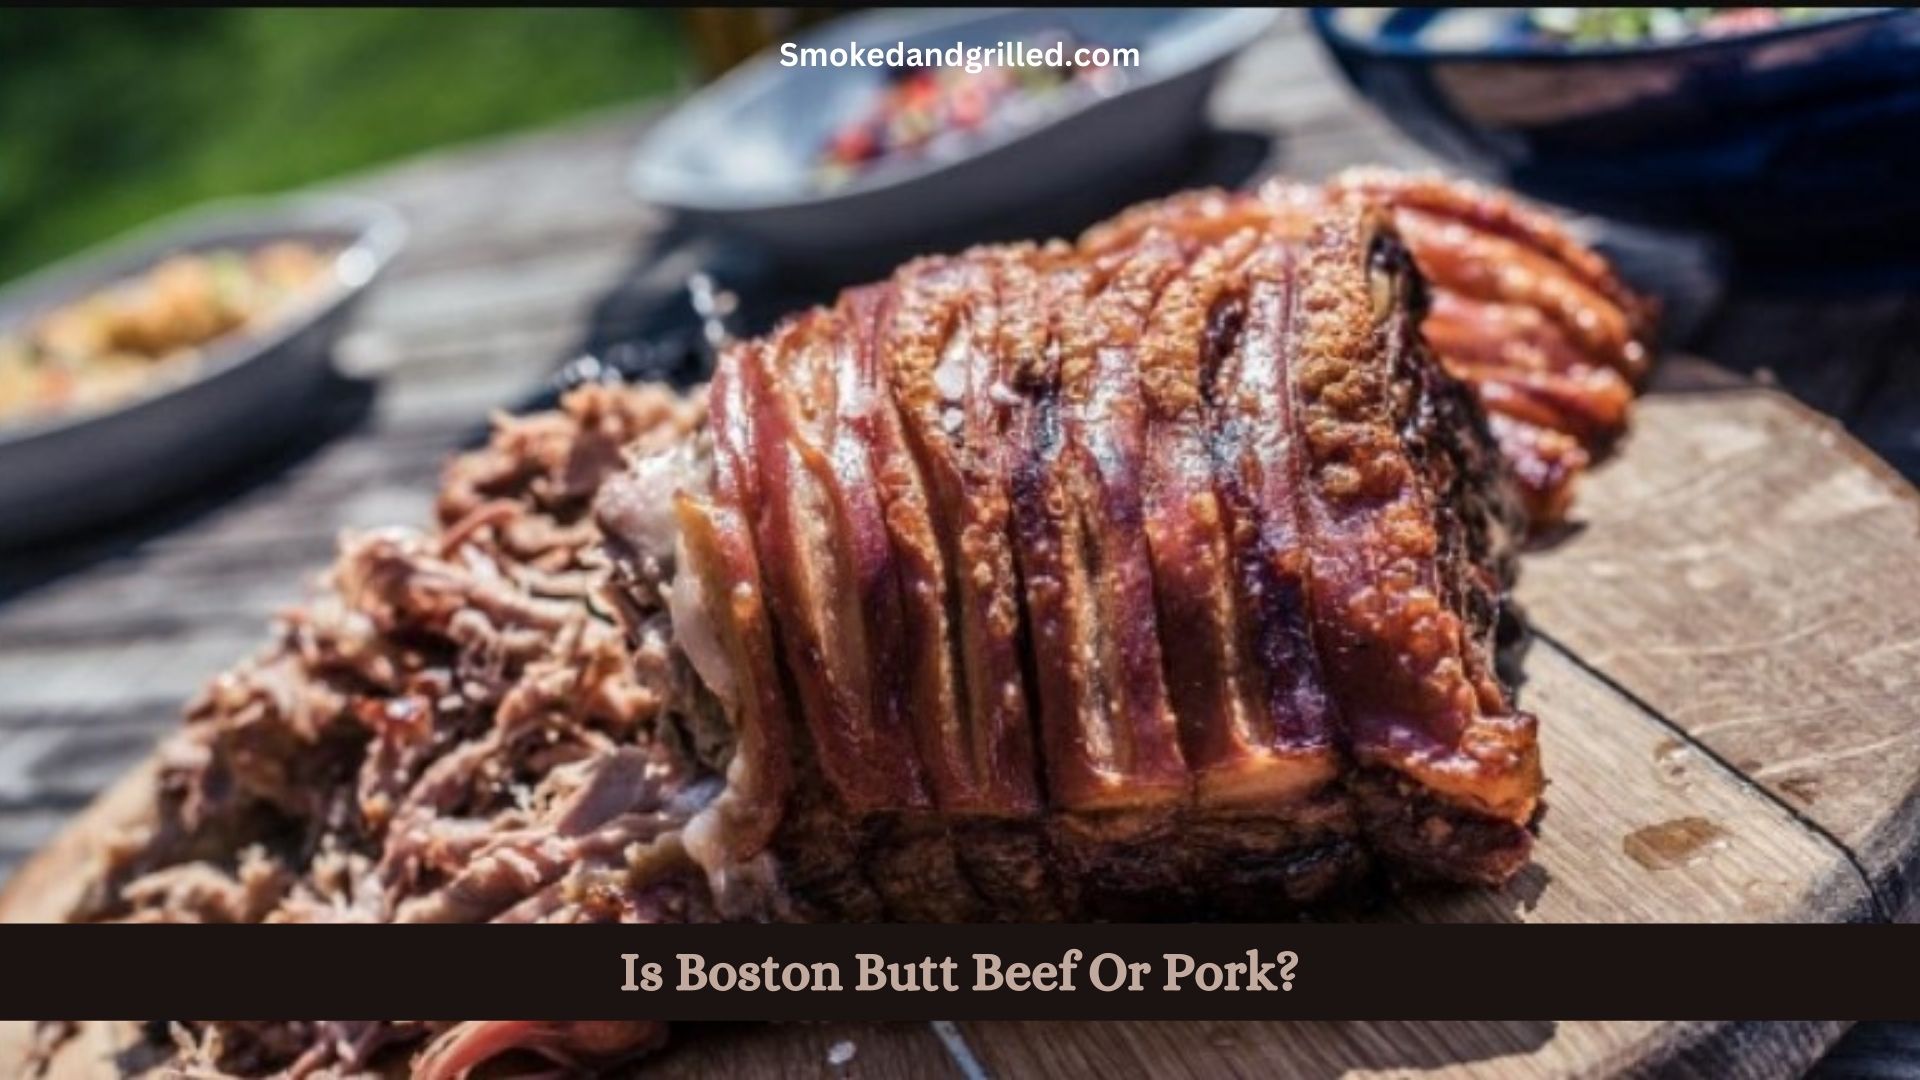 Is Boston Butt Beef Or Pork? - smokedandgrilled